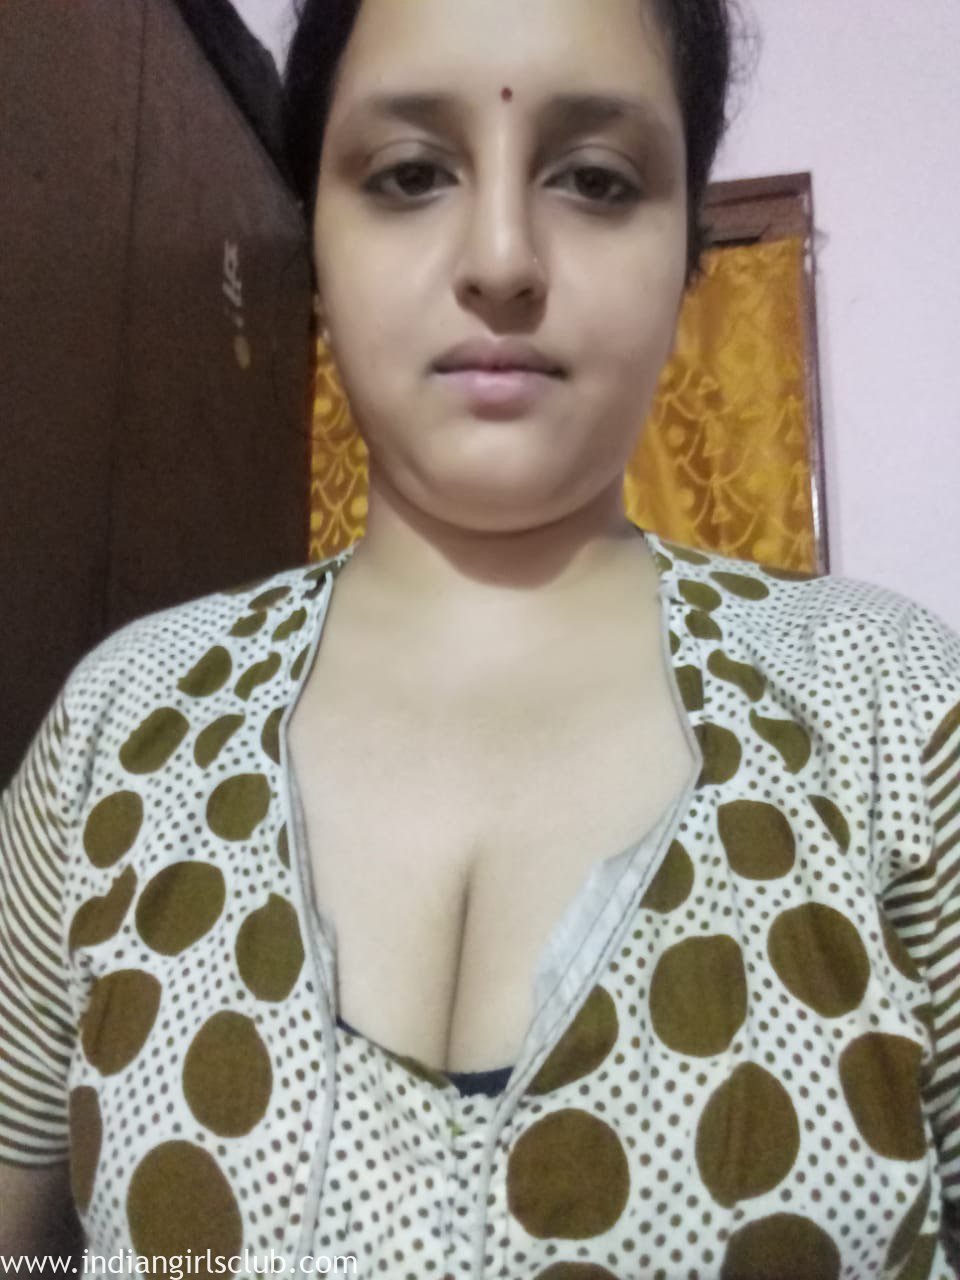 Horny Bengali Indian Housewife Ready For Hot image photo pic